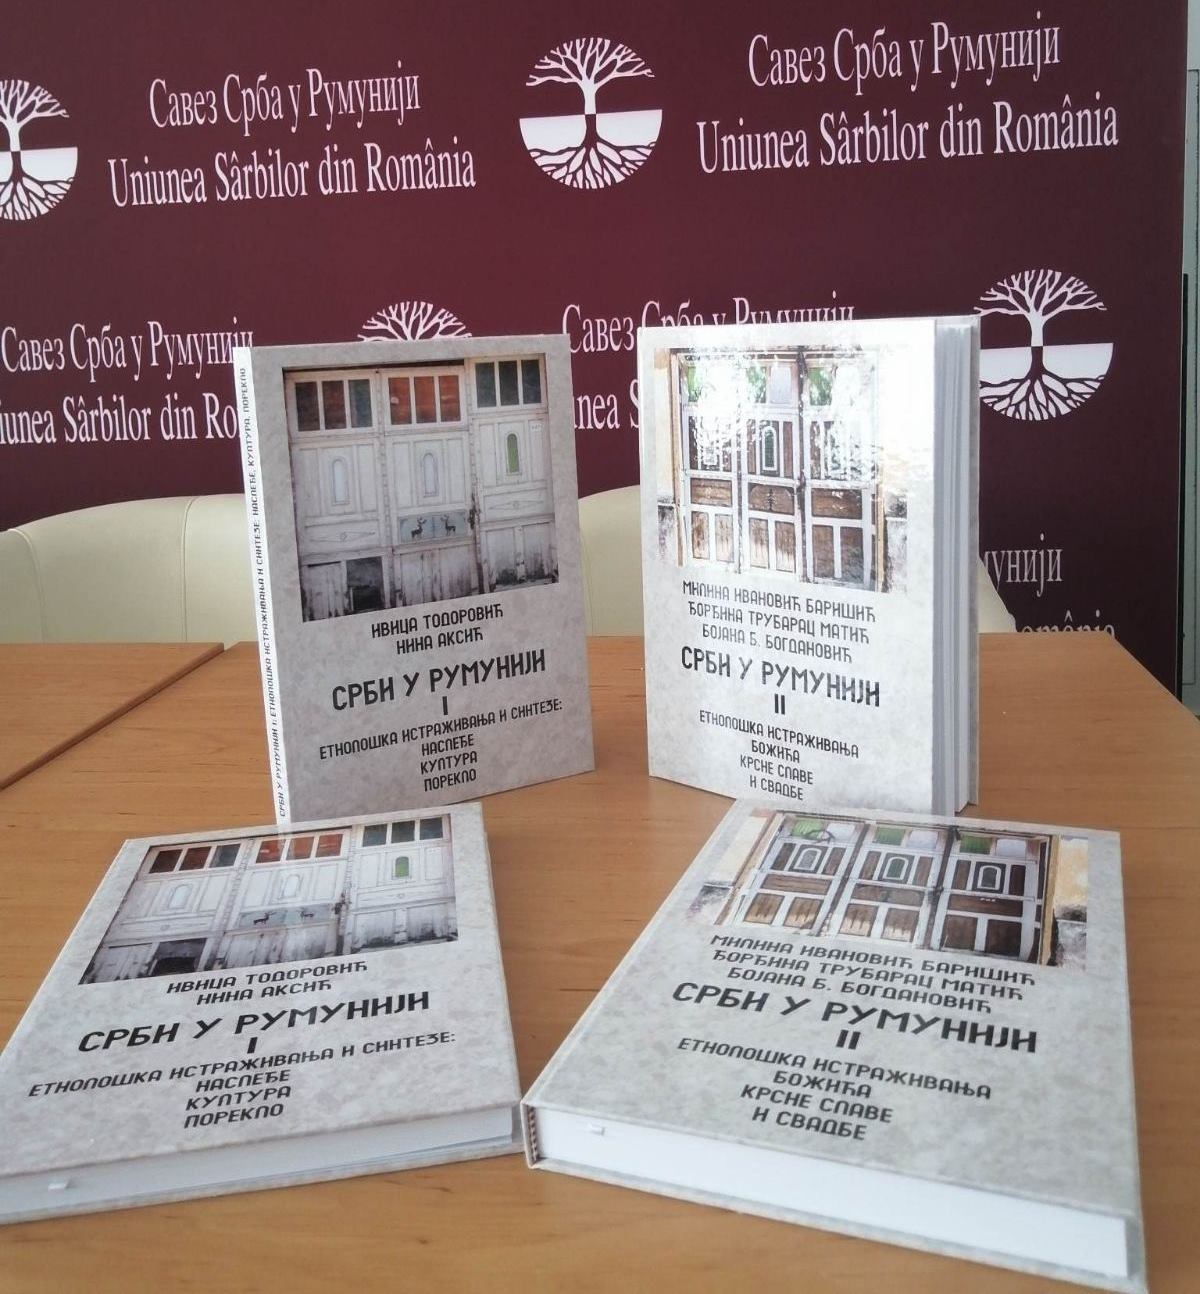 The two-volume monograph was published by the Union of Serbs of Romania and the SASA Institute of Ethnography